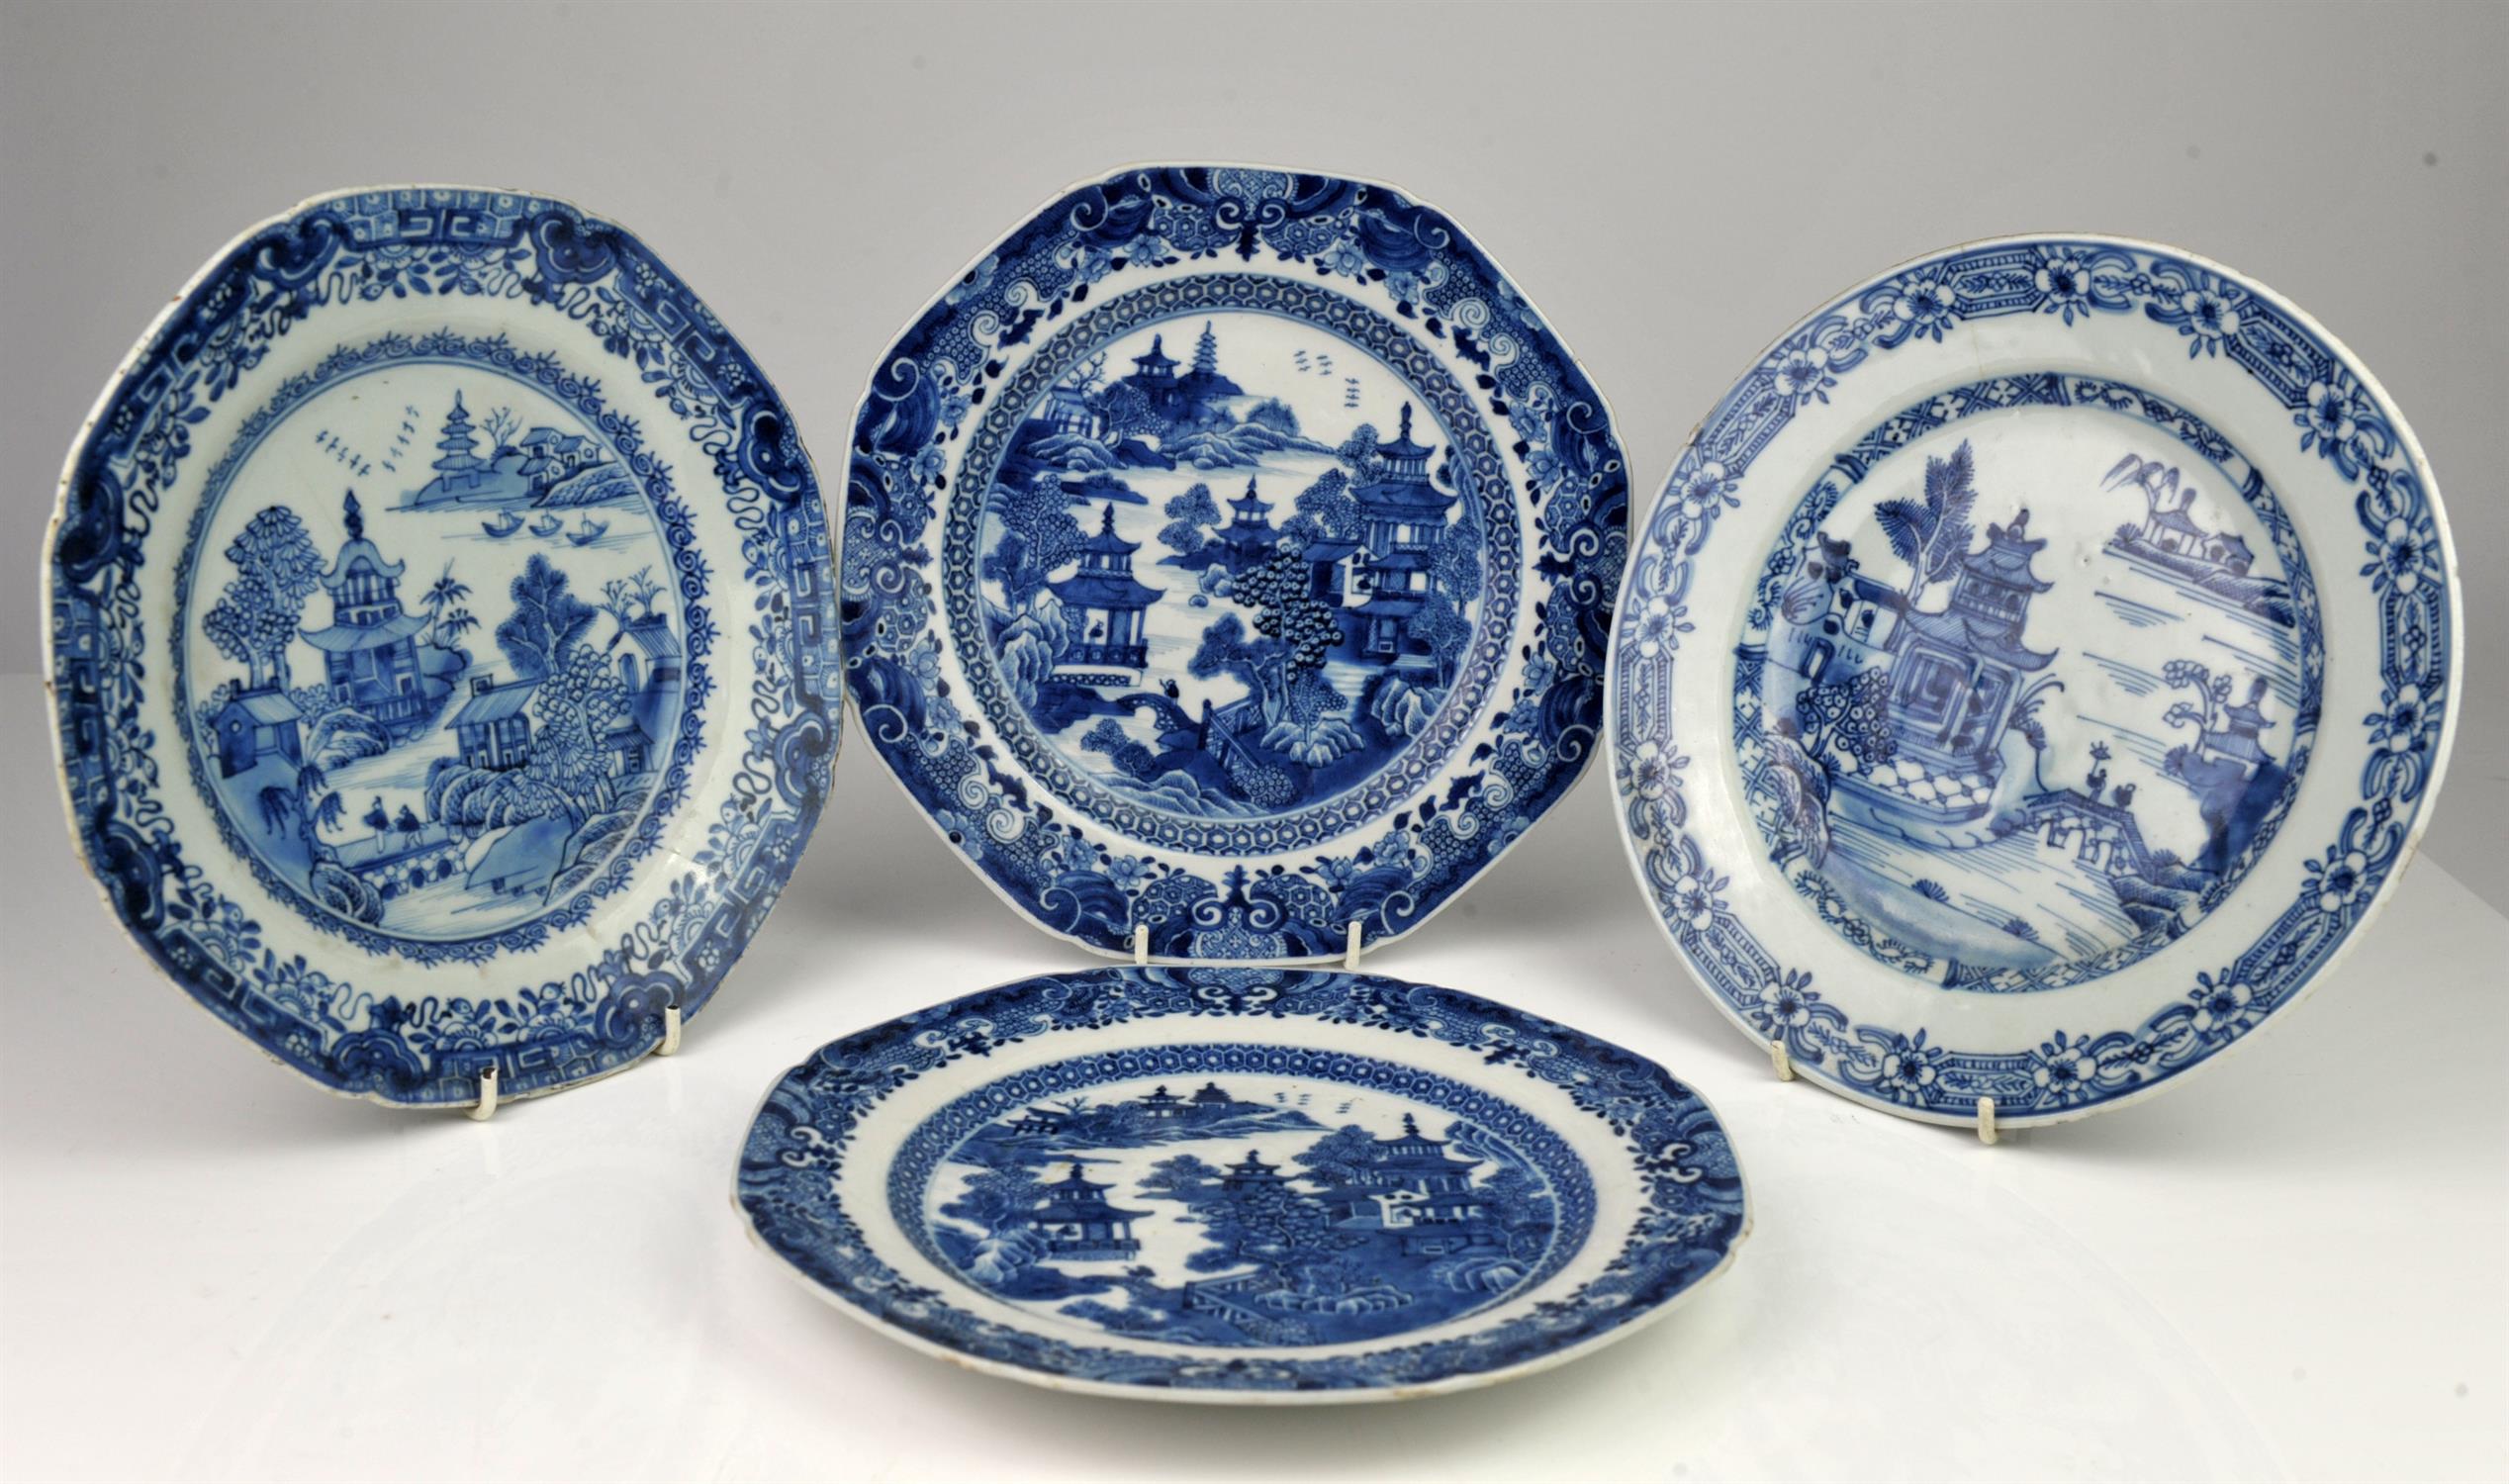 Four Chinese blue and white plates with patterned borders and decorated with figures on a bridge